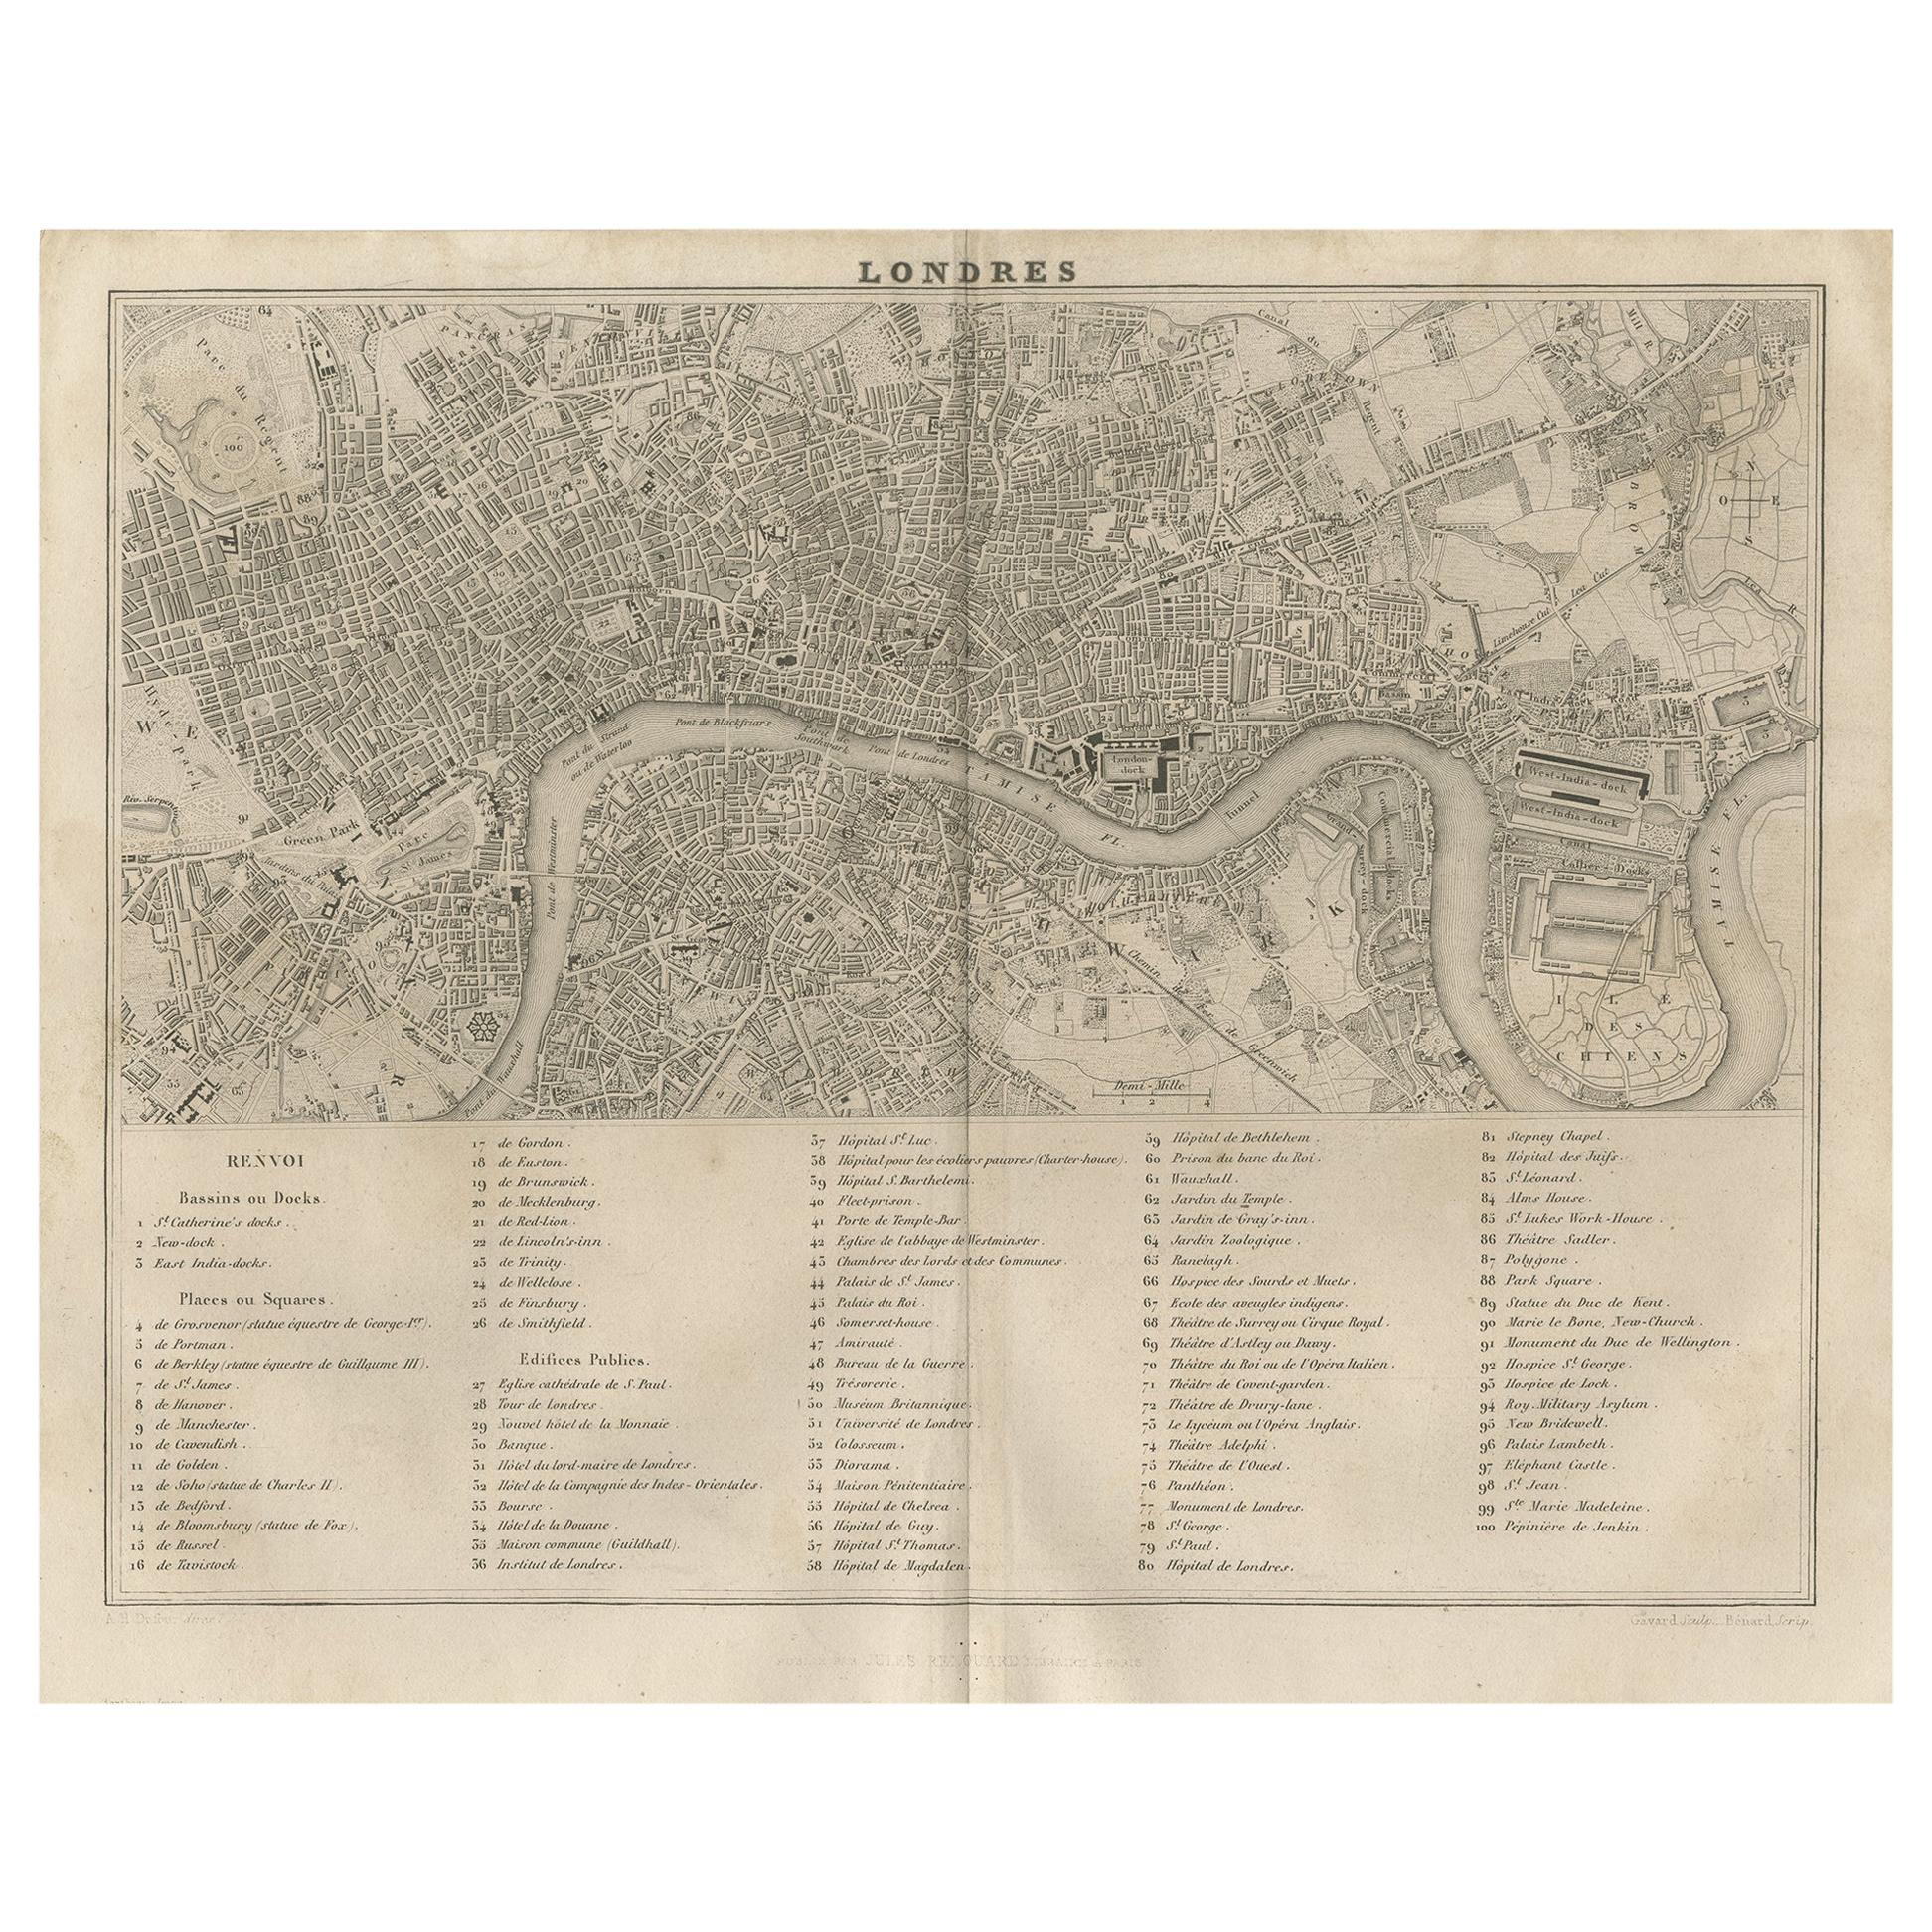 Antique Map of the City of London by Balbi '1847'